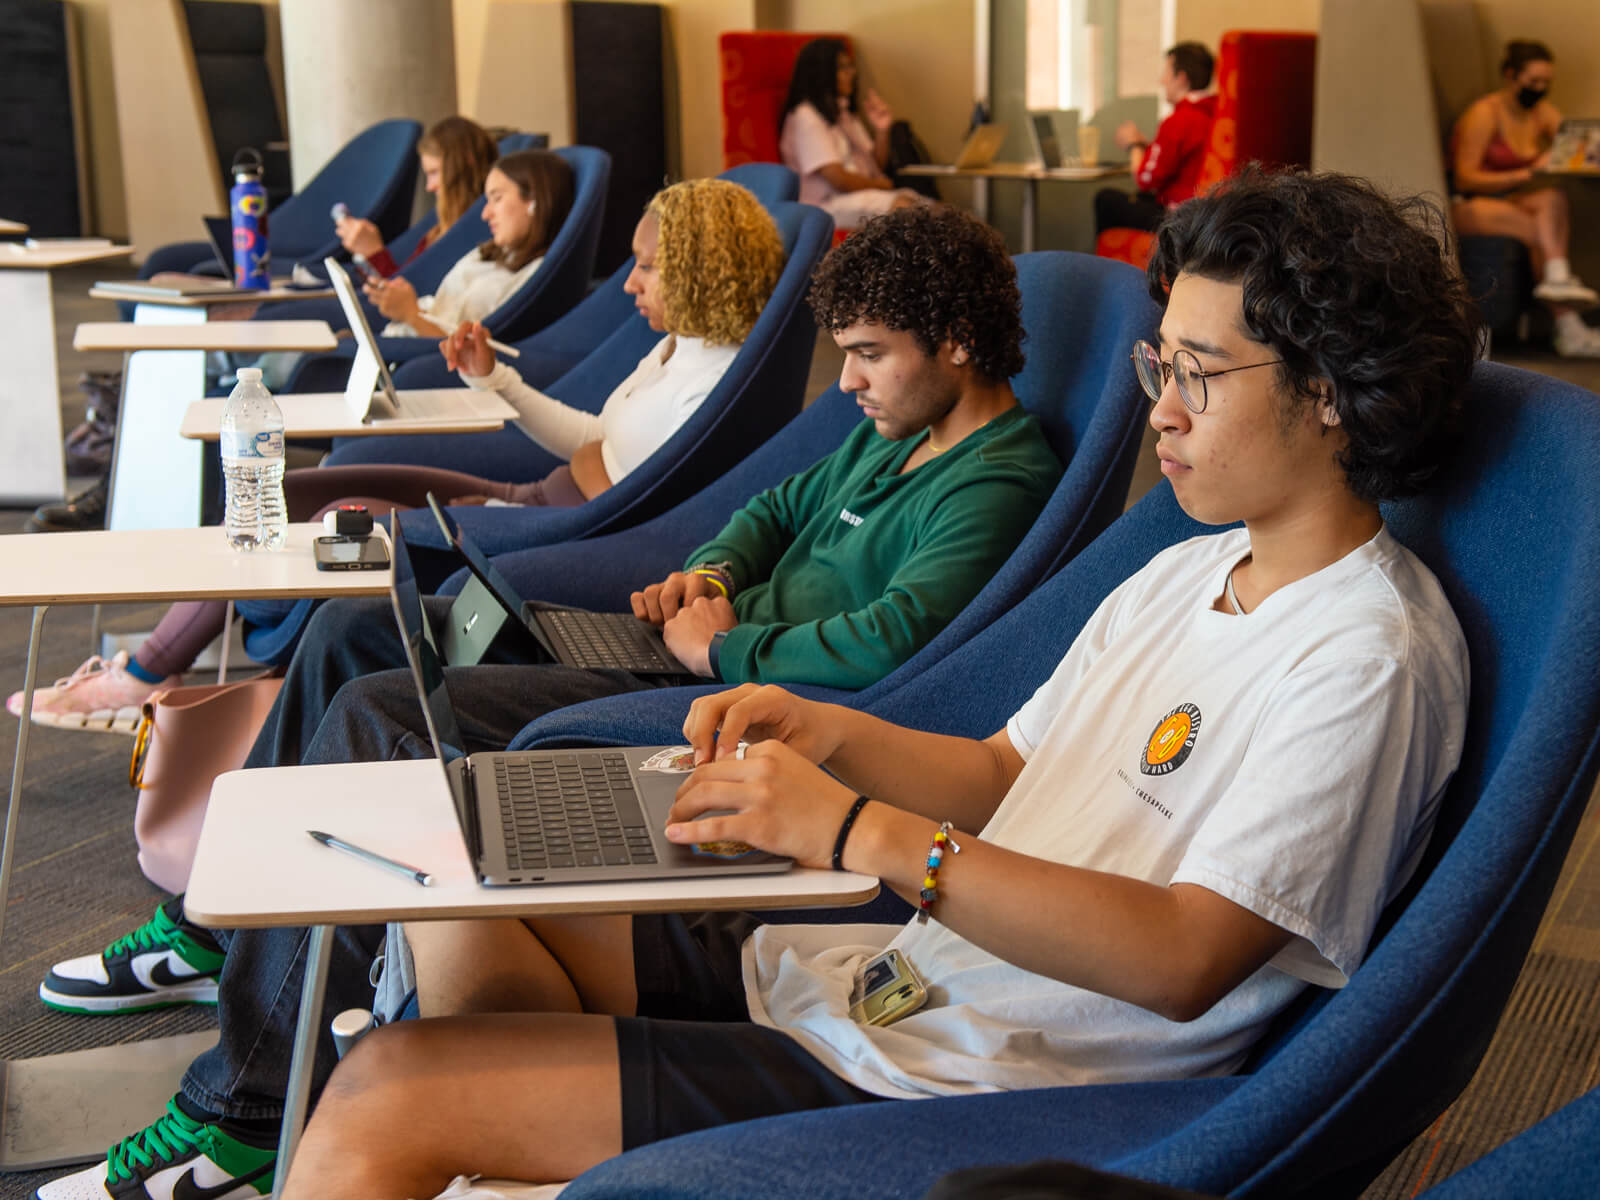 Group of students using computers at VCU.